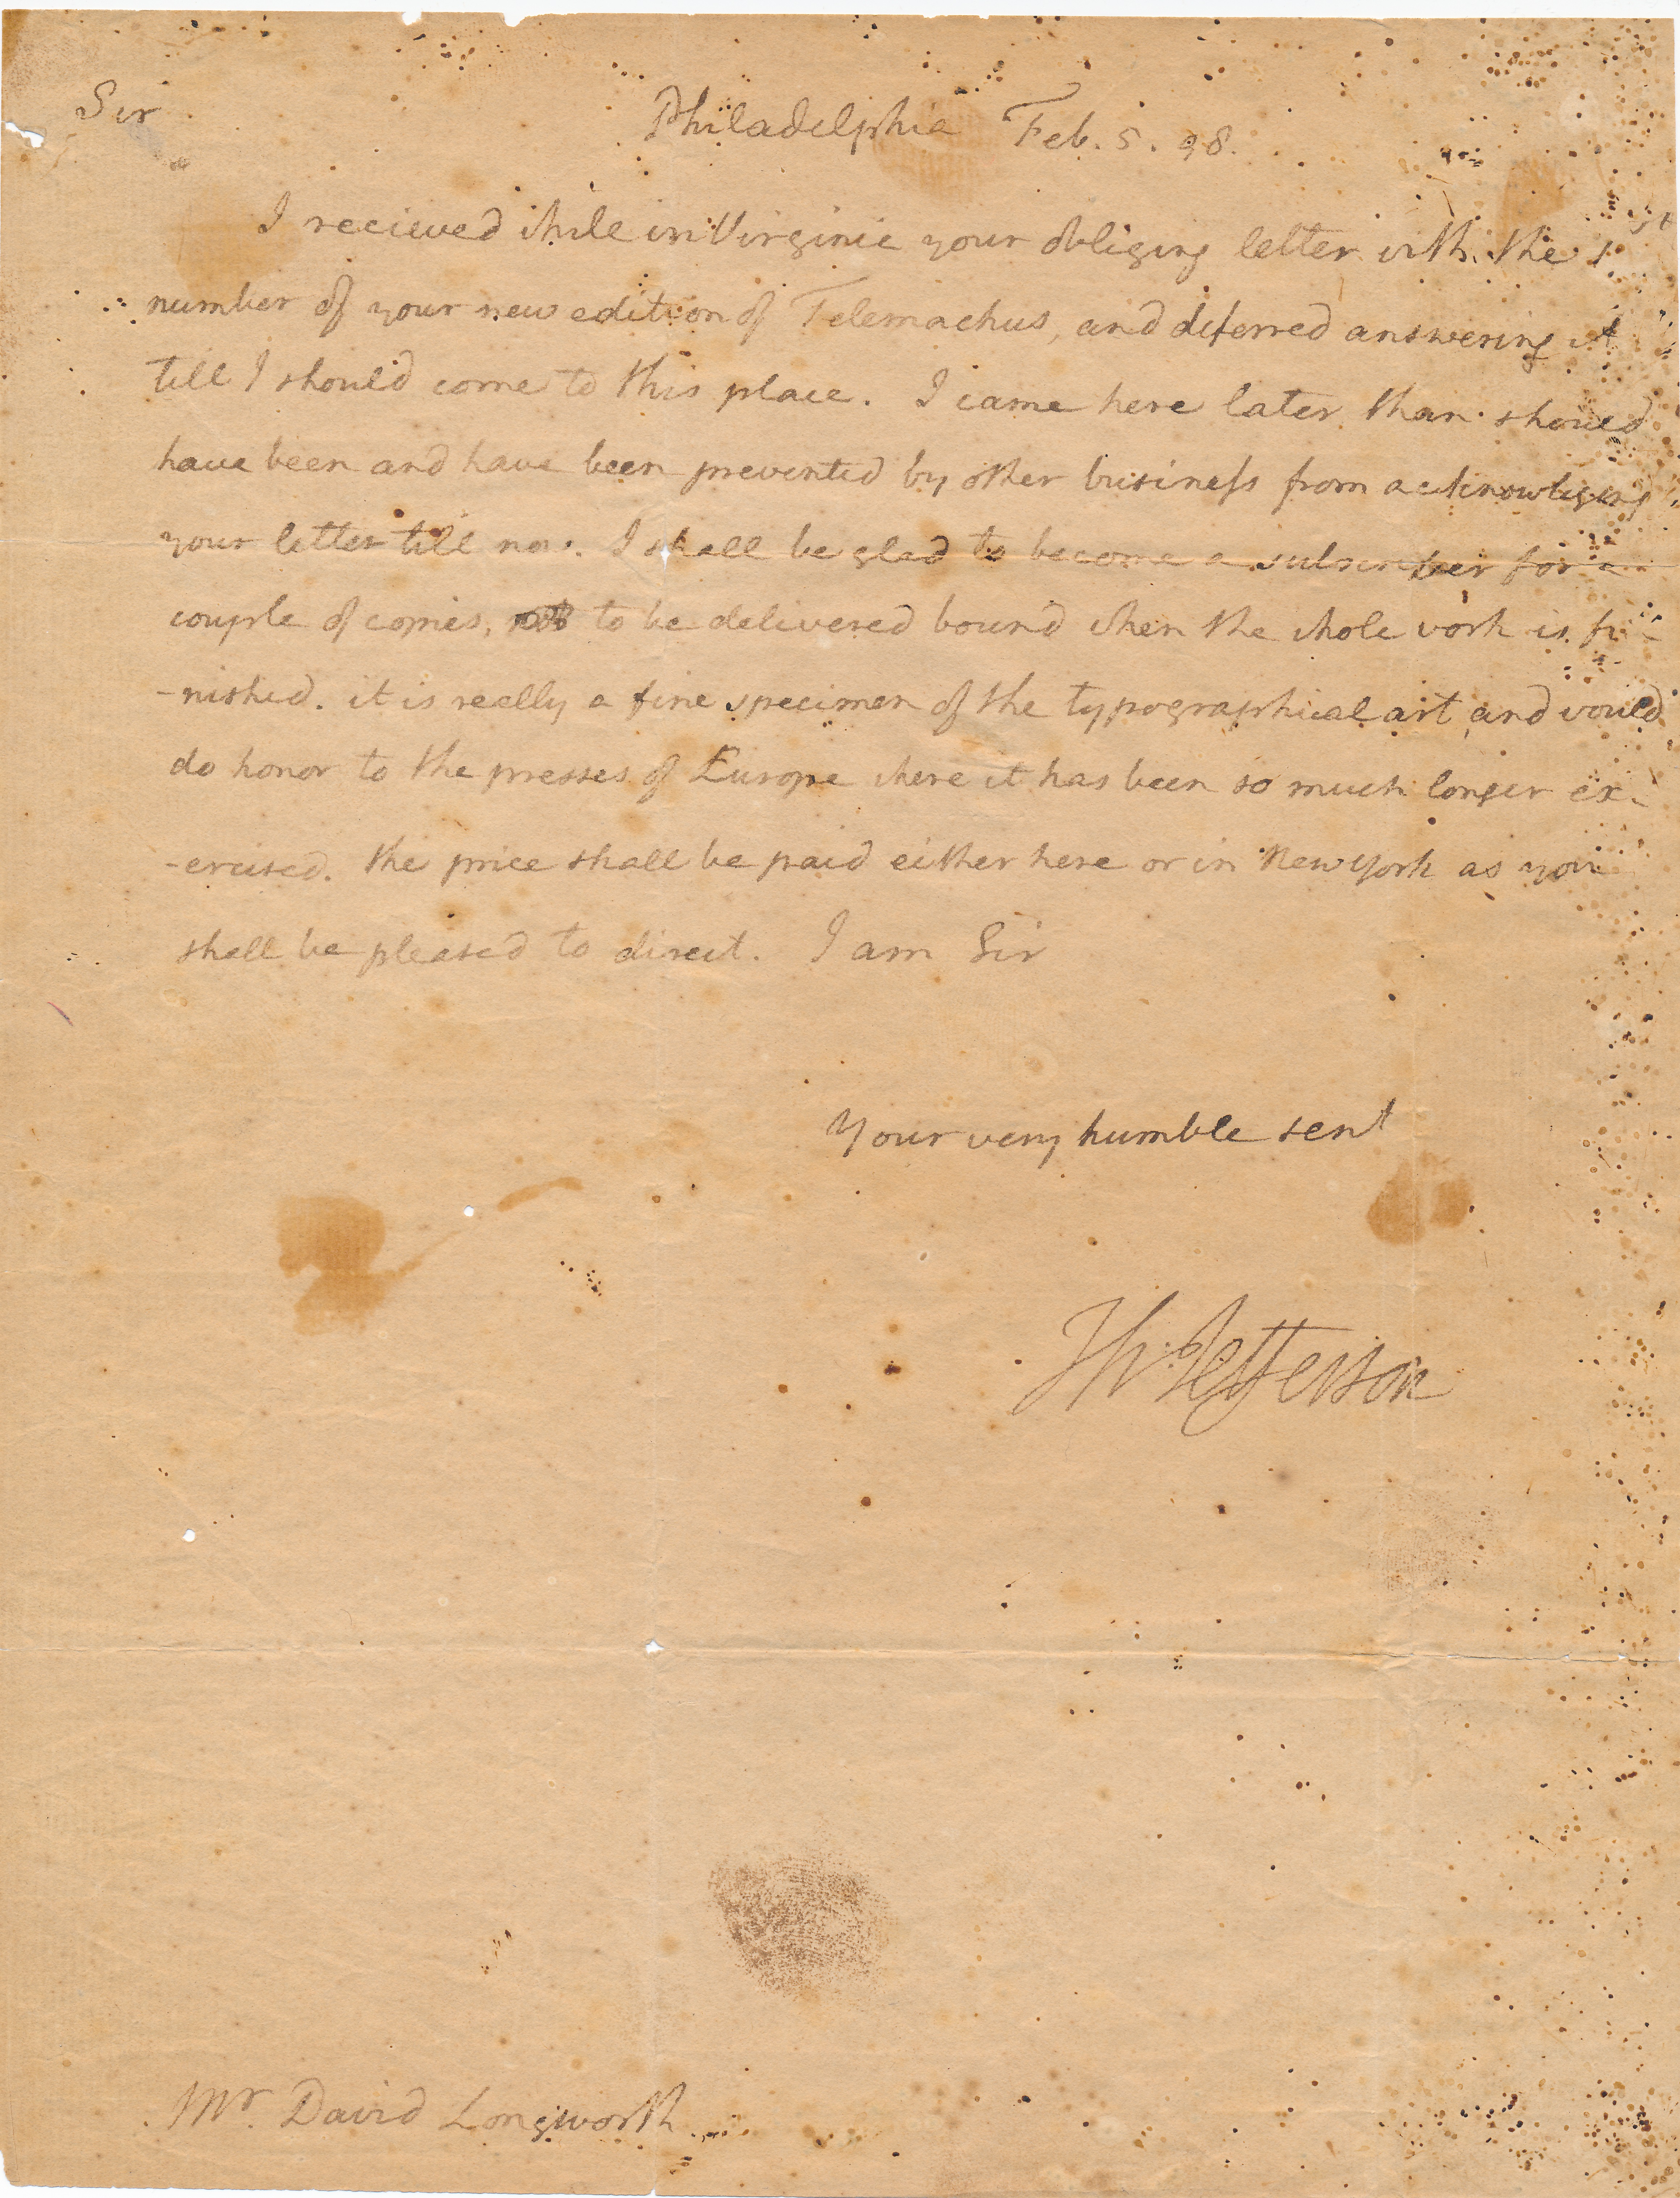 View of Jefferson's letter to Longworth